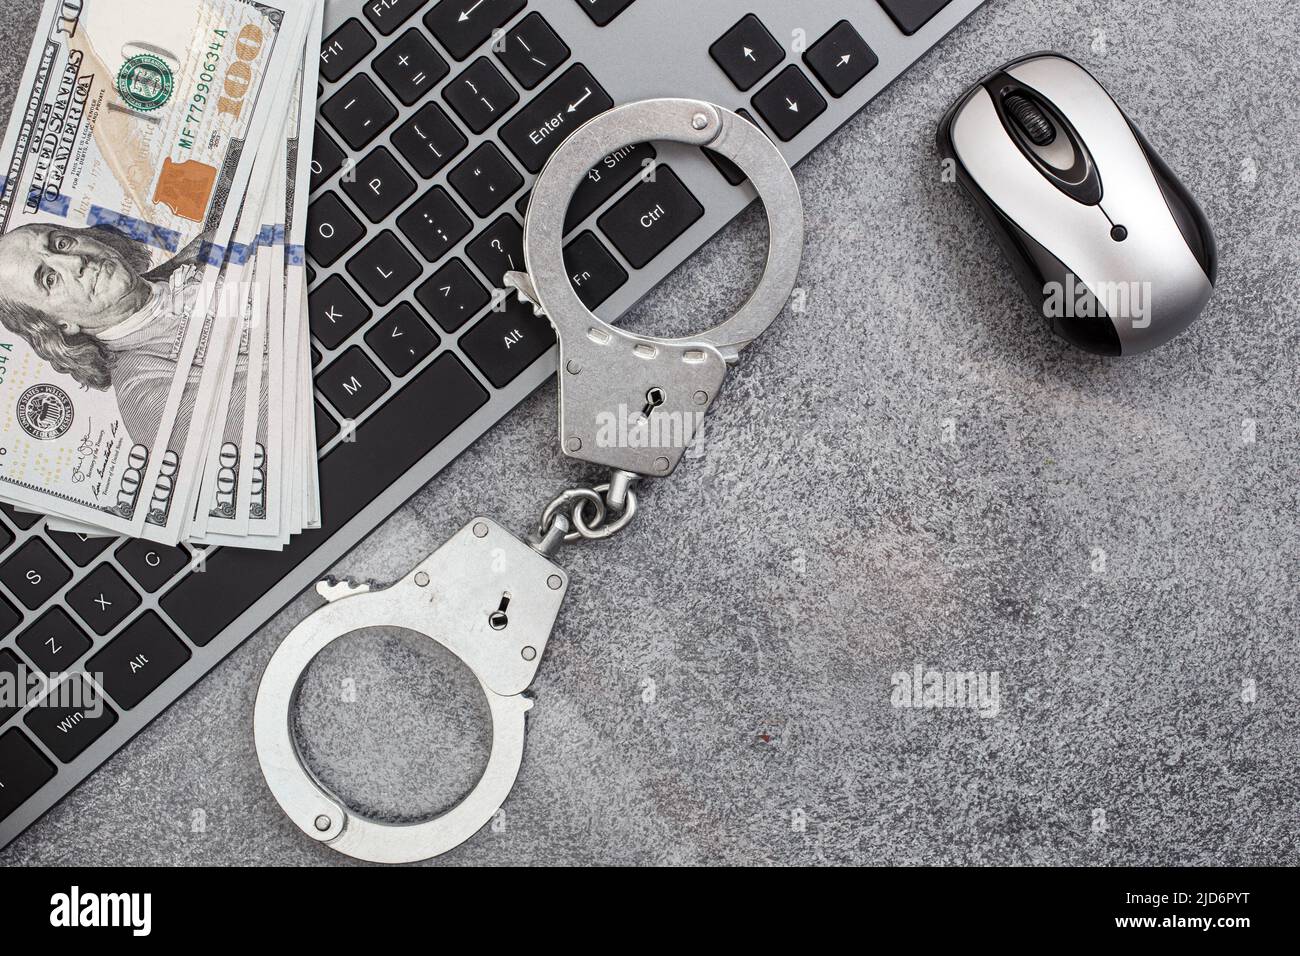 Handcuffs keyboard and dollars above Stock Photo